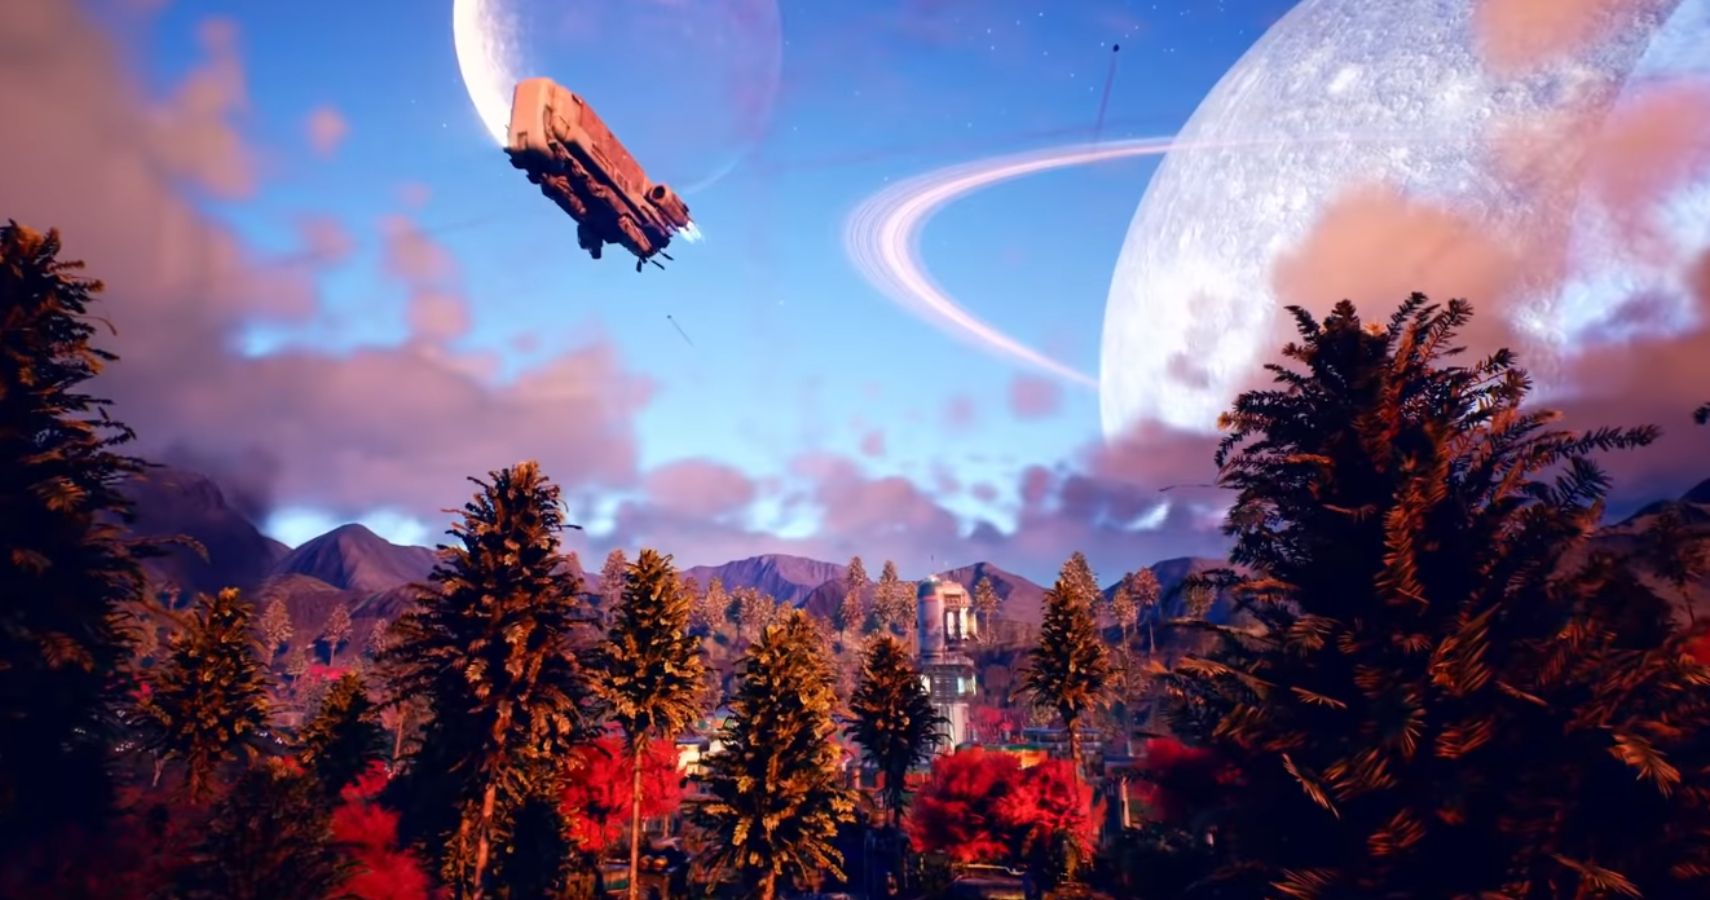 download the outer worlds 2 release date